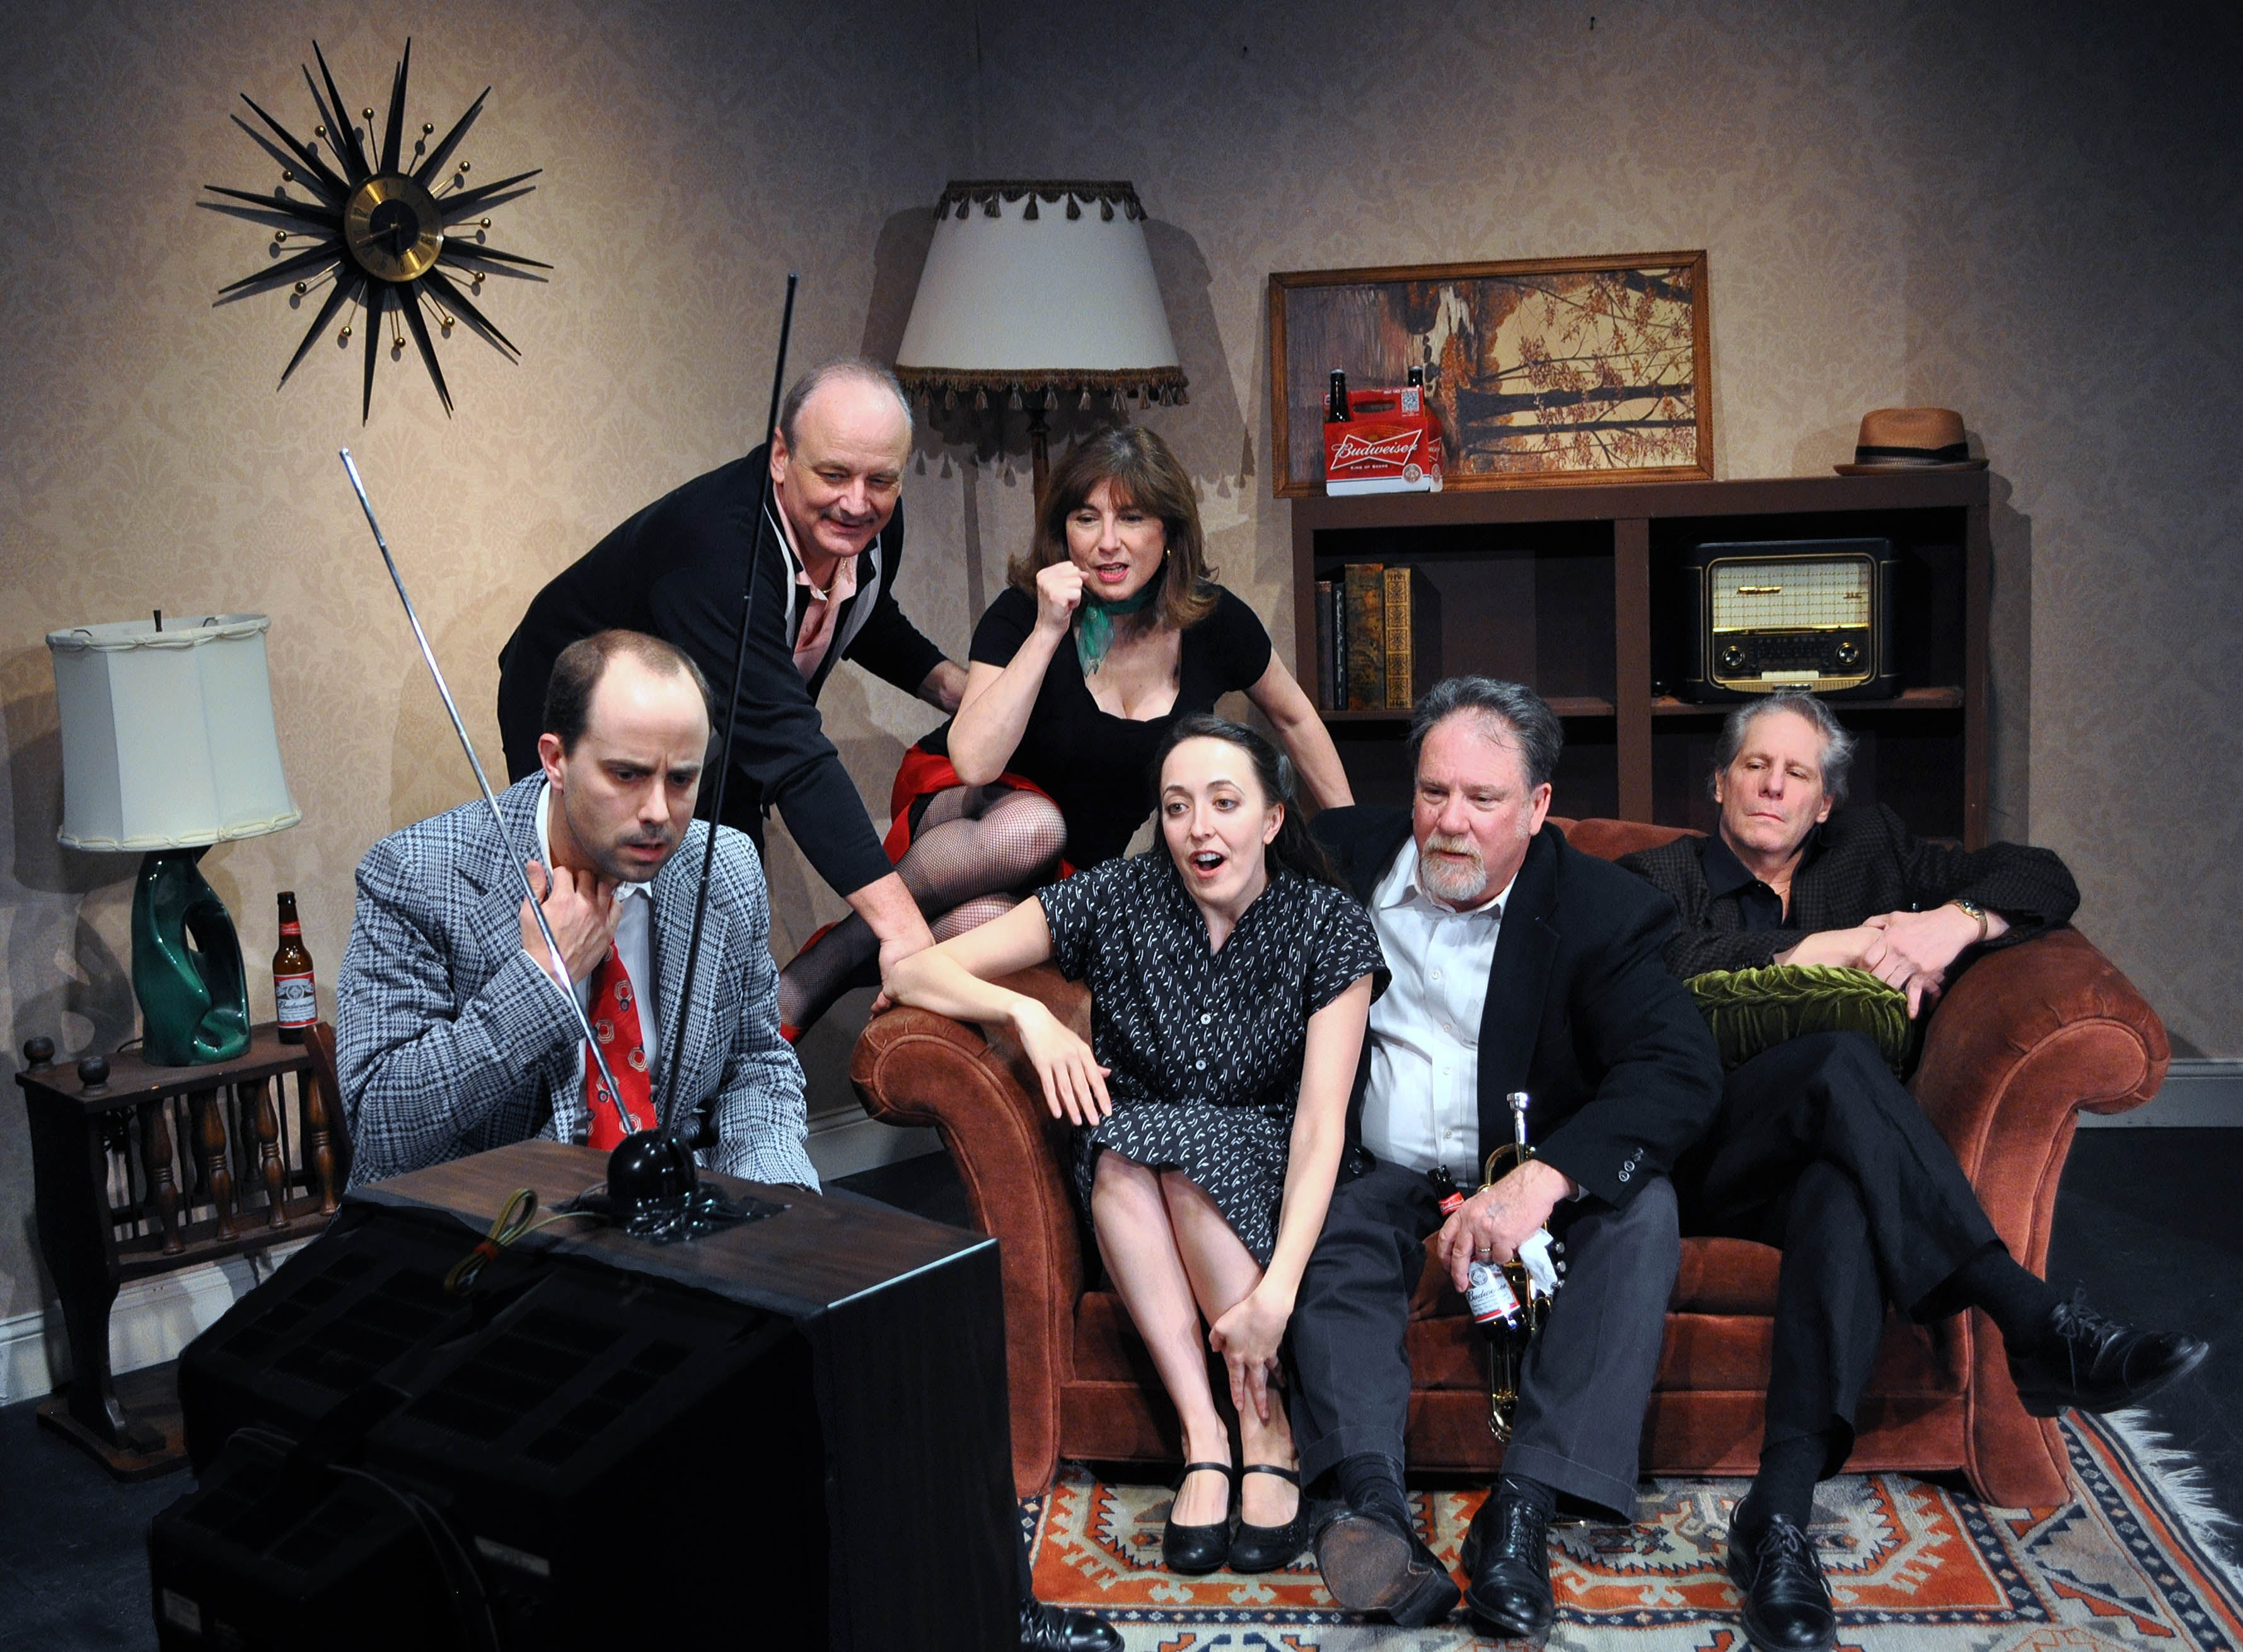 Image: L to R Bobby Welsh as Jonesy, Craig Geoffrion as Ziggy, Tina Thronson as Patsy, Andra Whitt as Terry, John Coscia as Gene, and David James as Al in the Providence Players Production of Side Man.